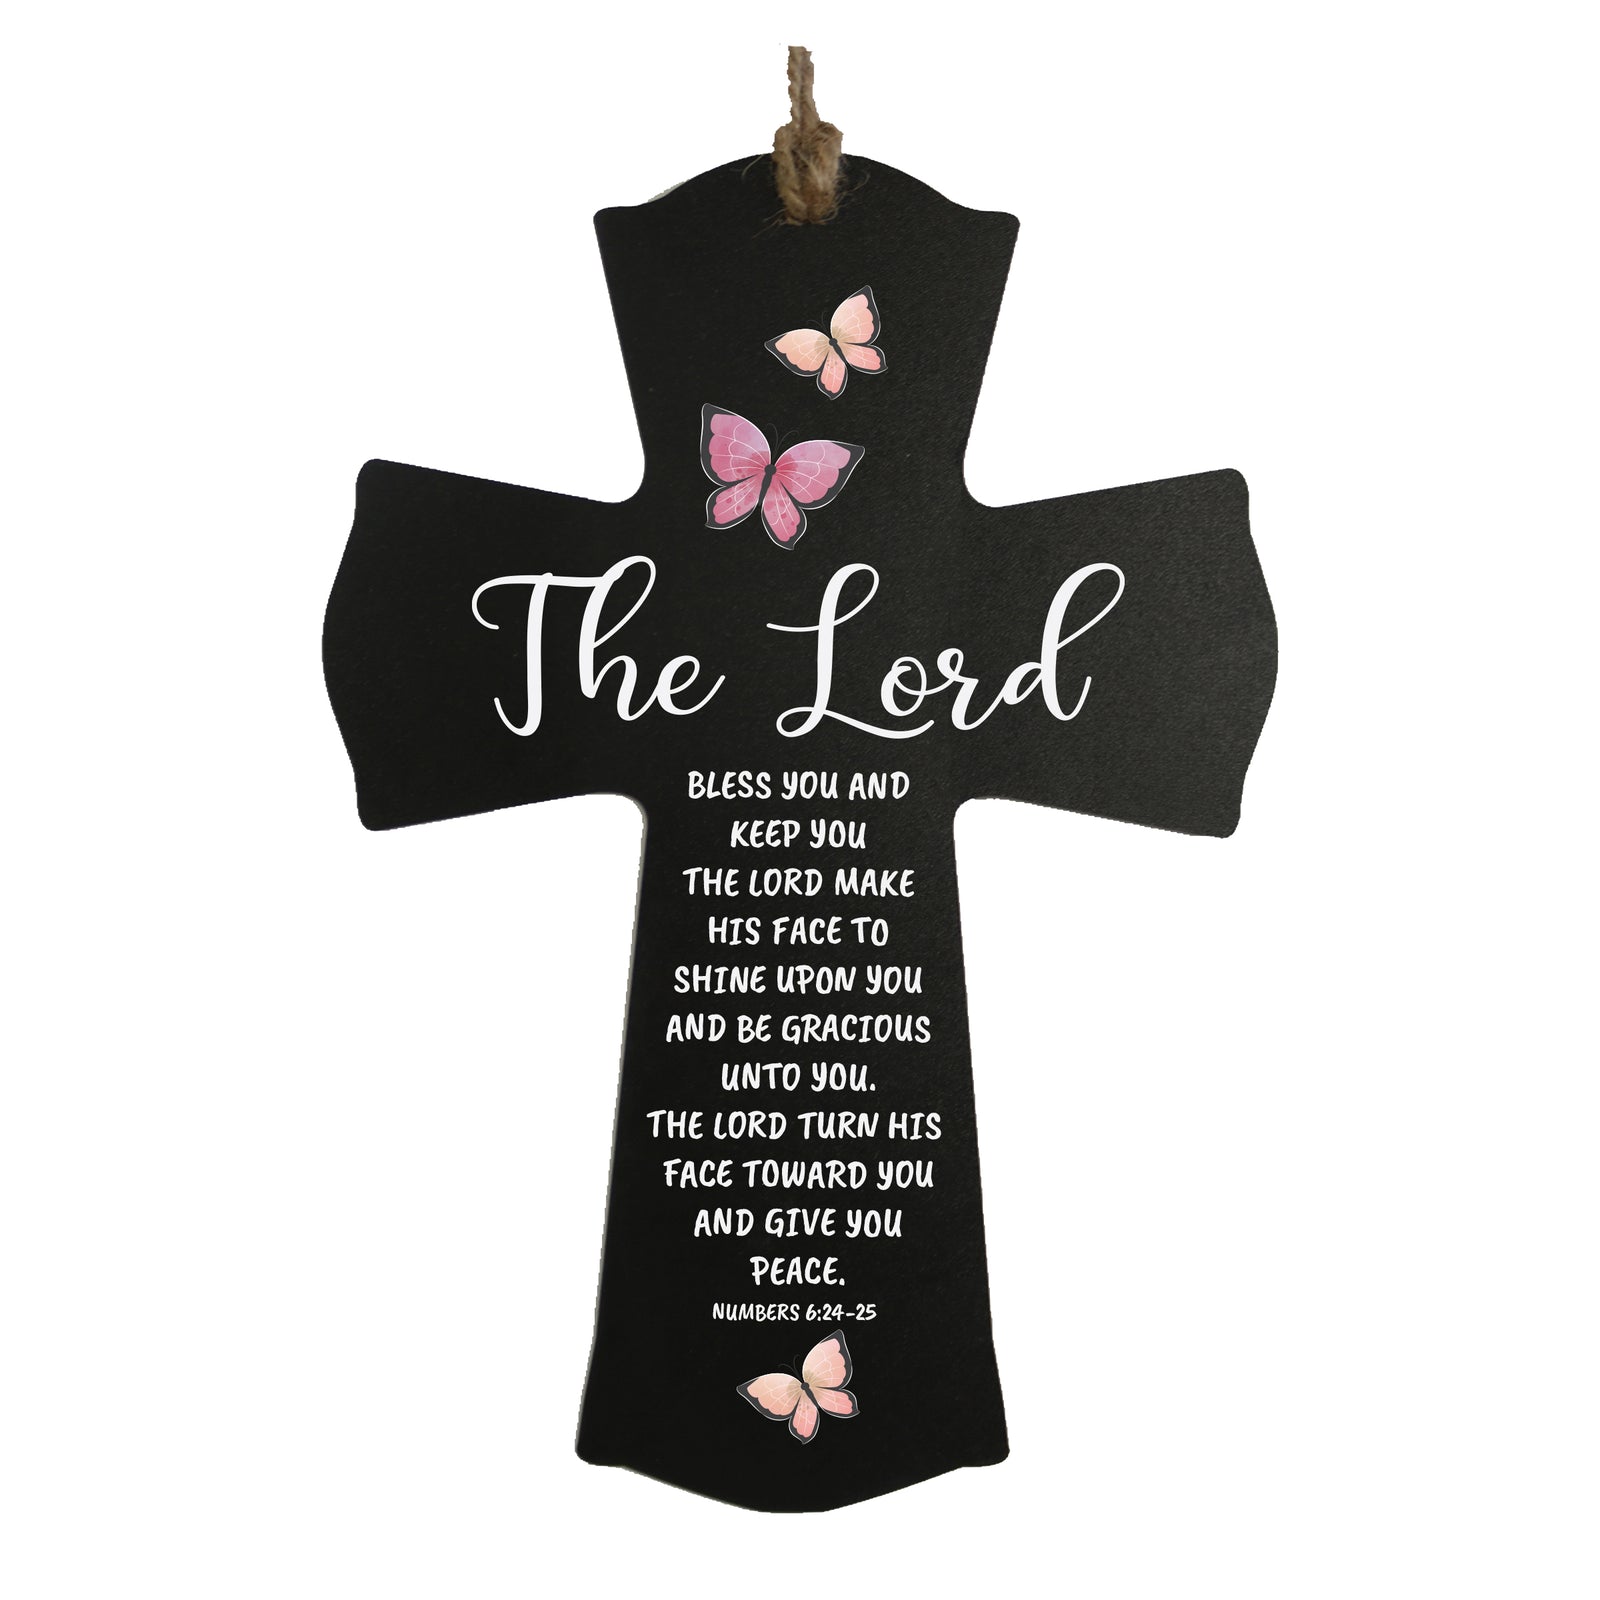 LifeSong Milestones Printed Baptism Gift for Godson, Godchild - Christening Printed Hanging Wall Cross from Godparents for First Holy Communion 8.5” x 11”